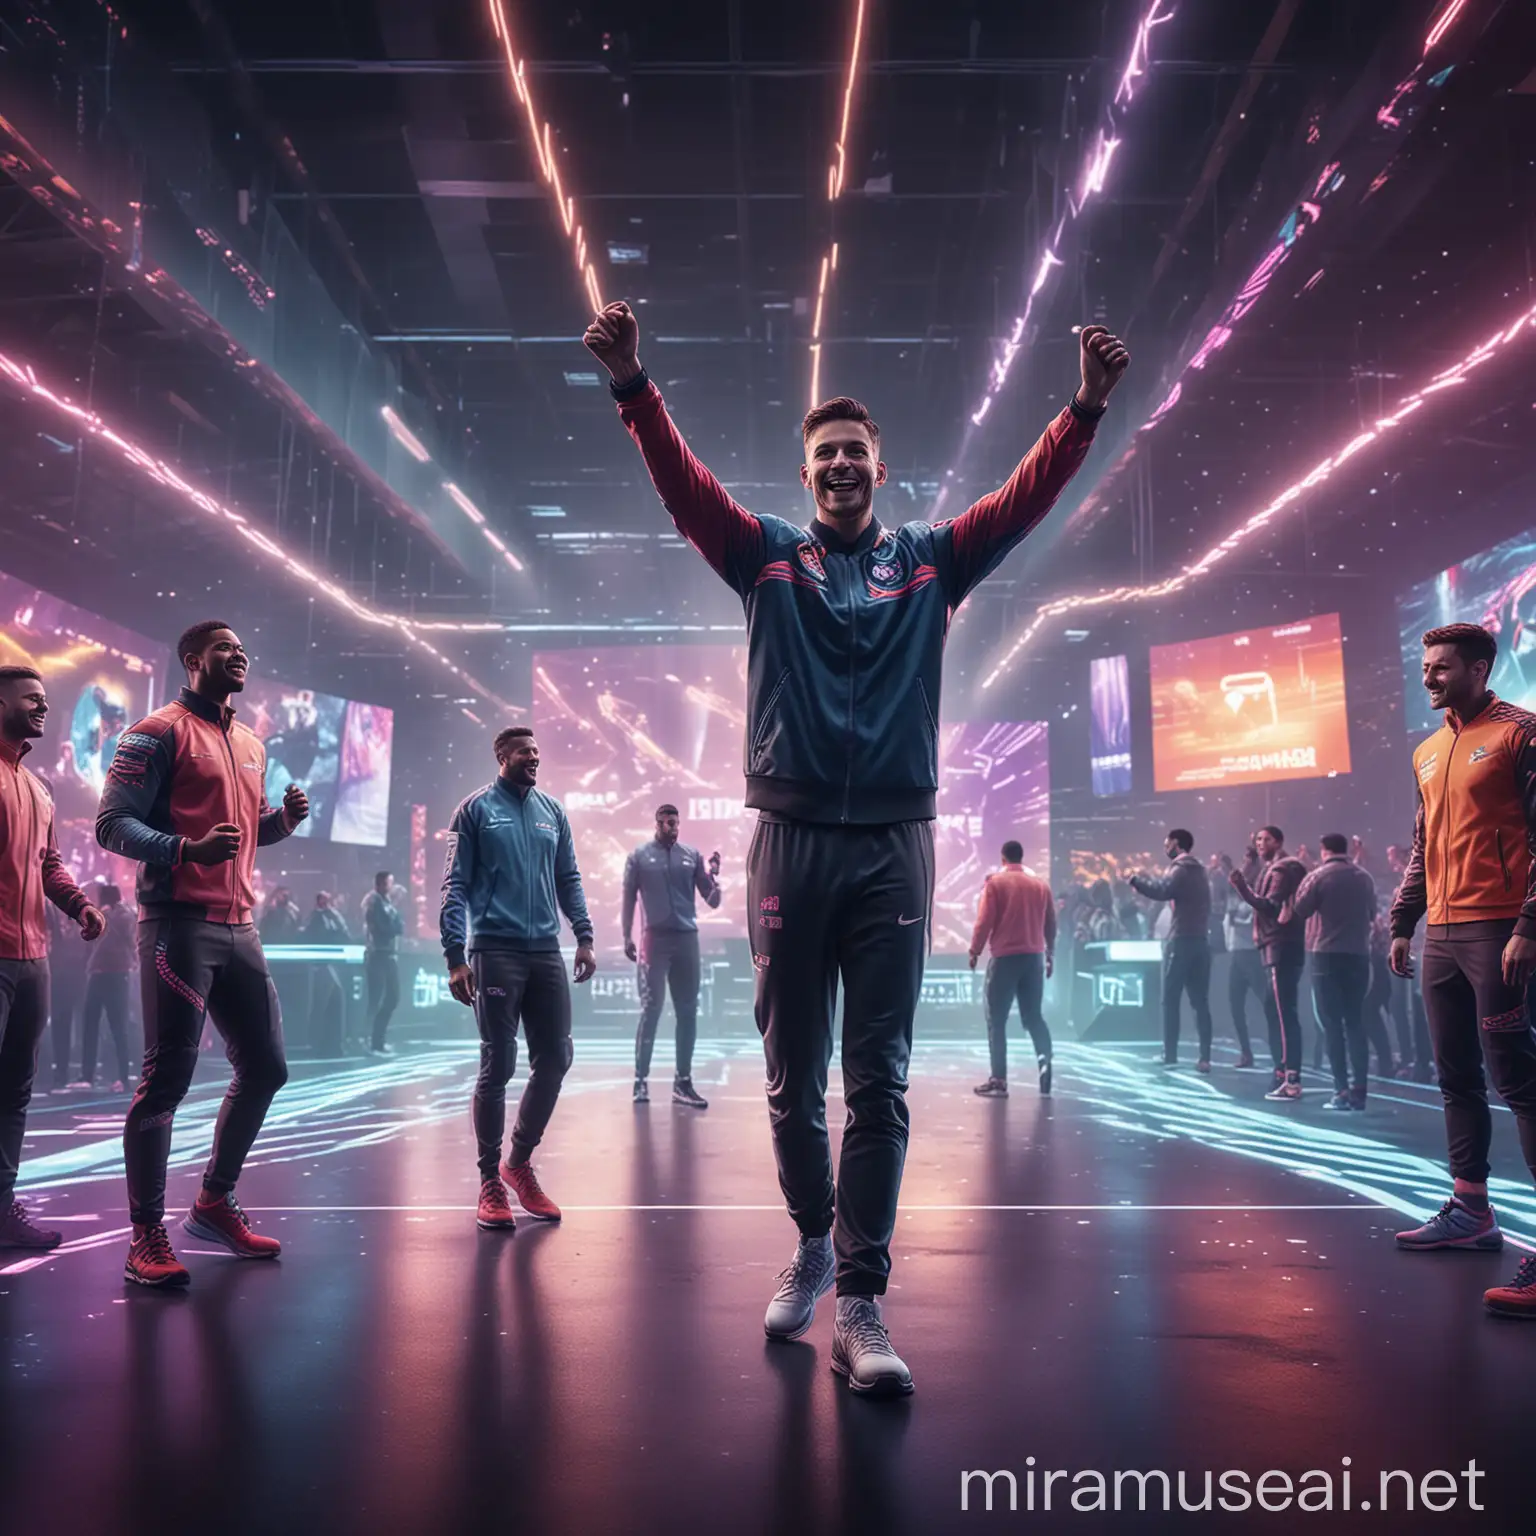 Futuristic Sports Victory Celebration with Holographic Displays